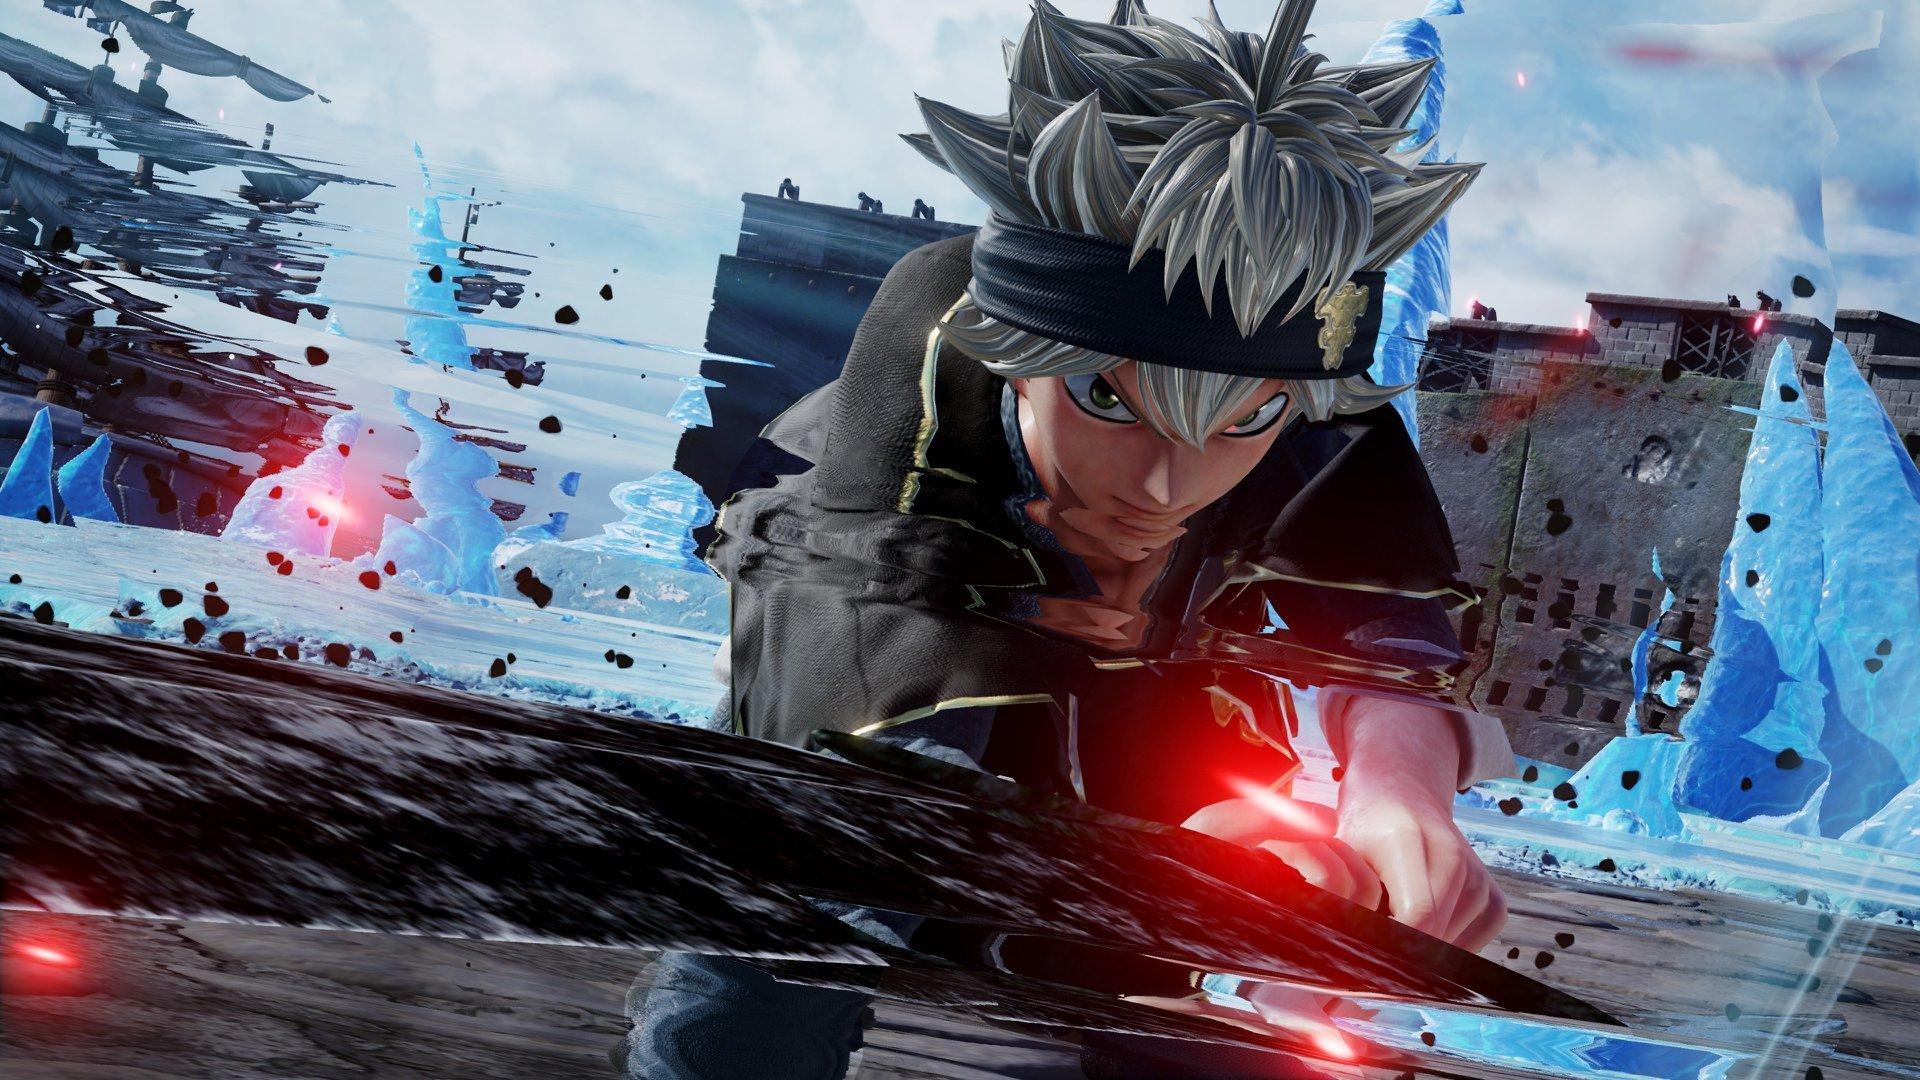 Black Clover's Asta Will be Playable in Jump Force. See Screenshots